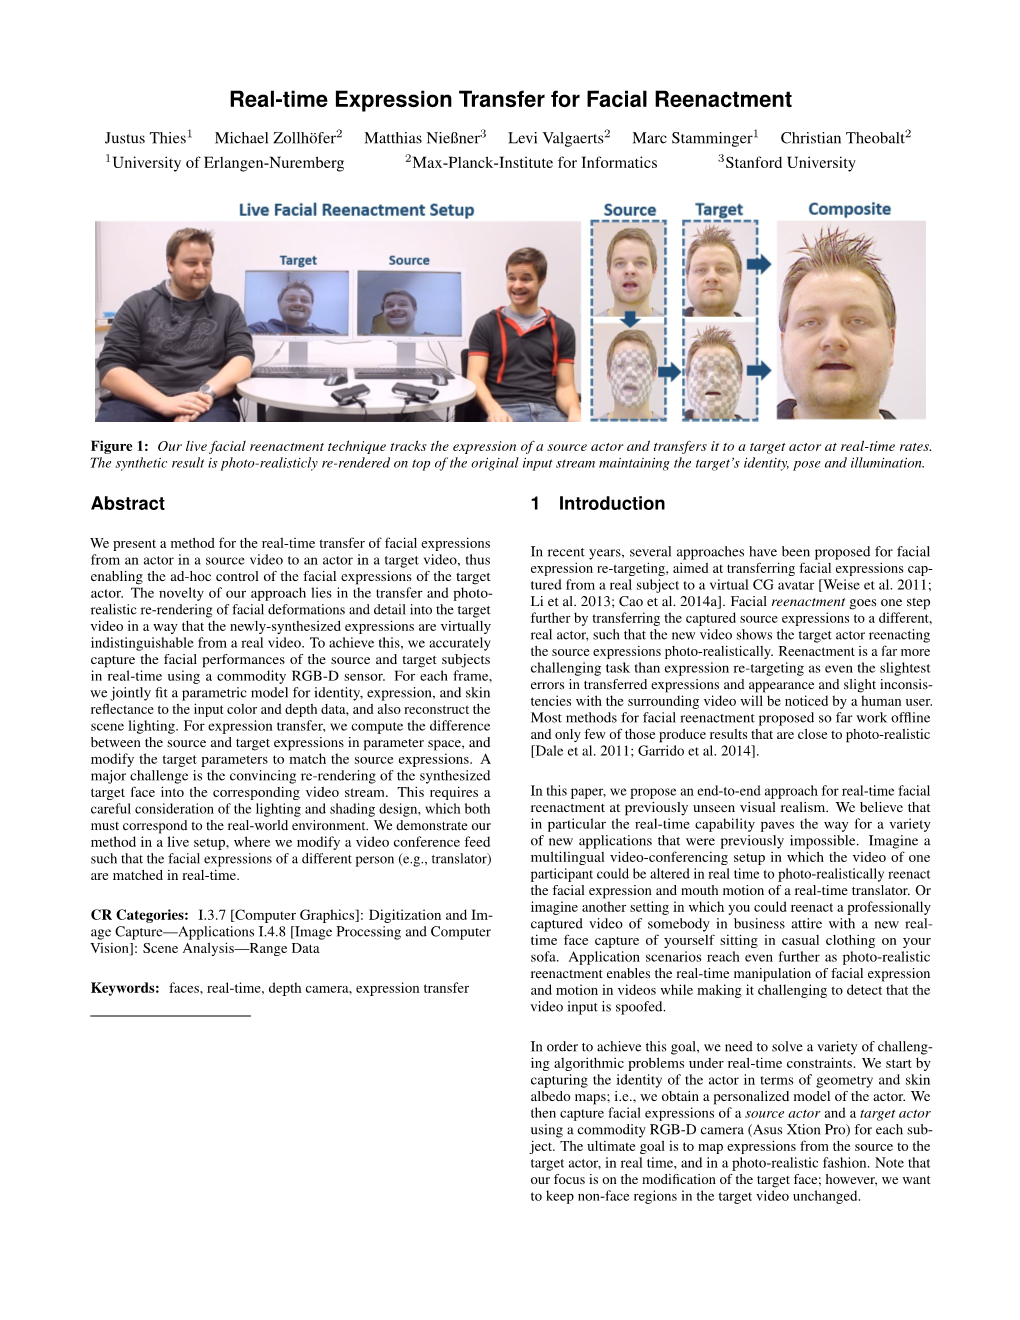 Real-Time Expression Transfer for Facial Reenactment